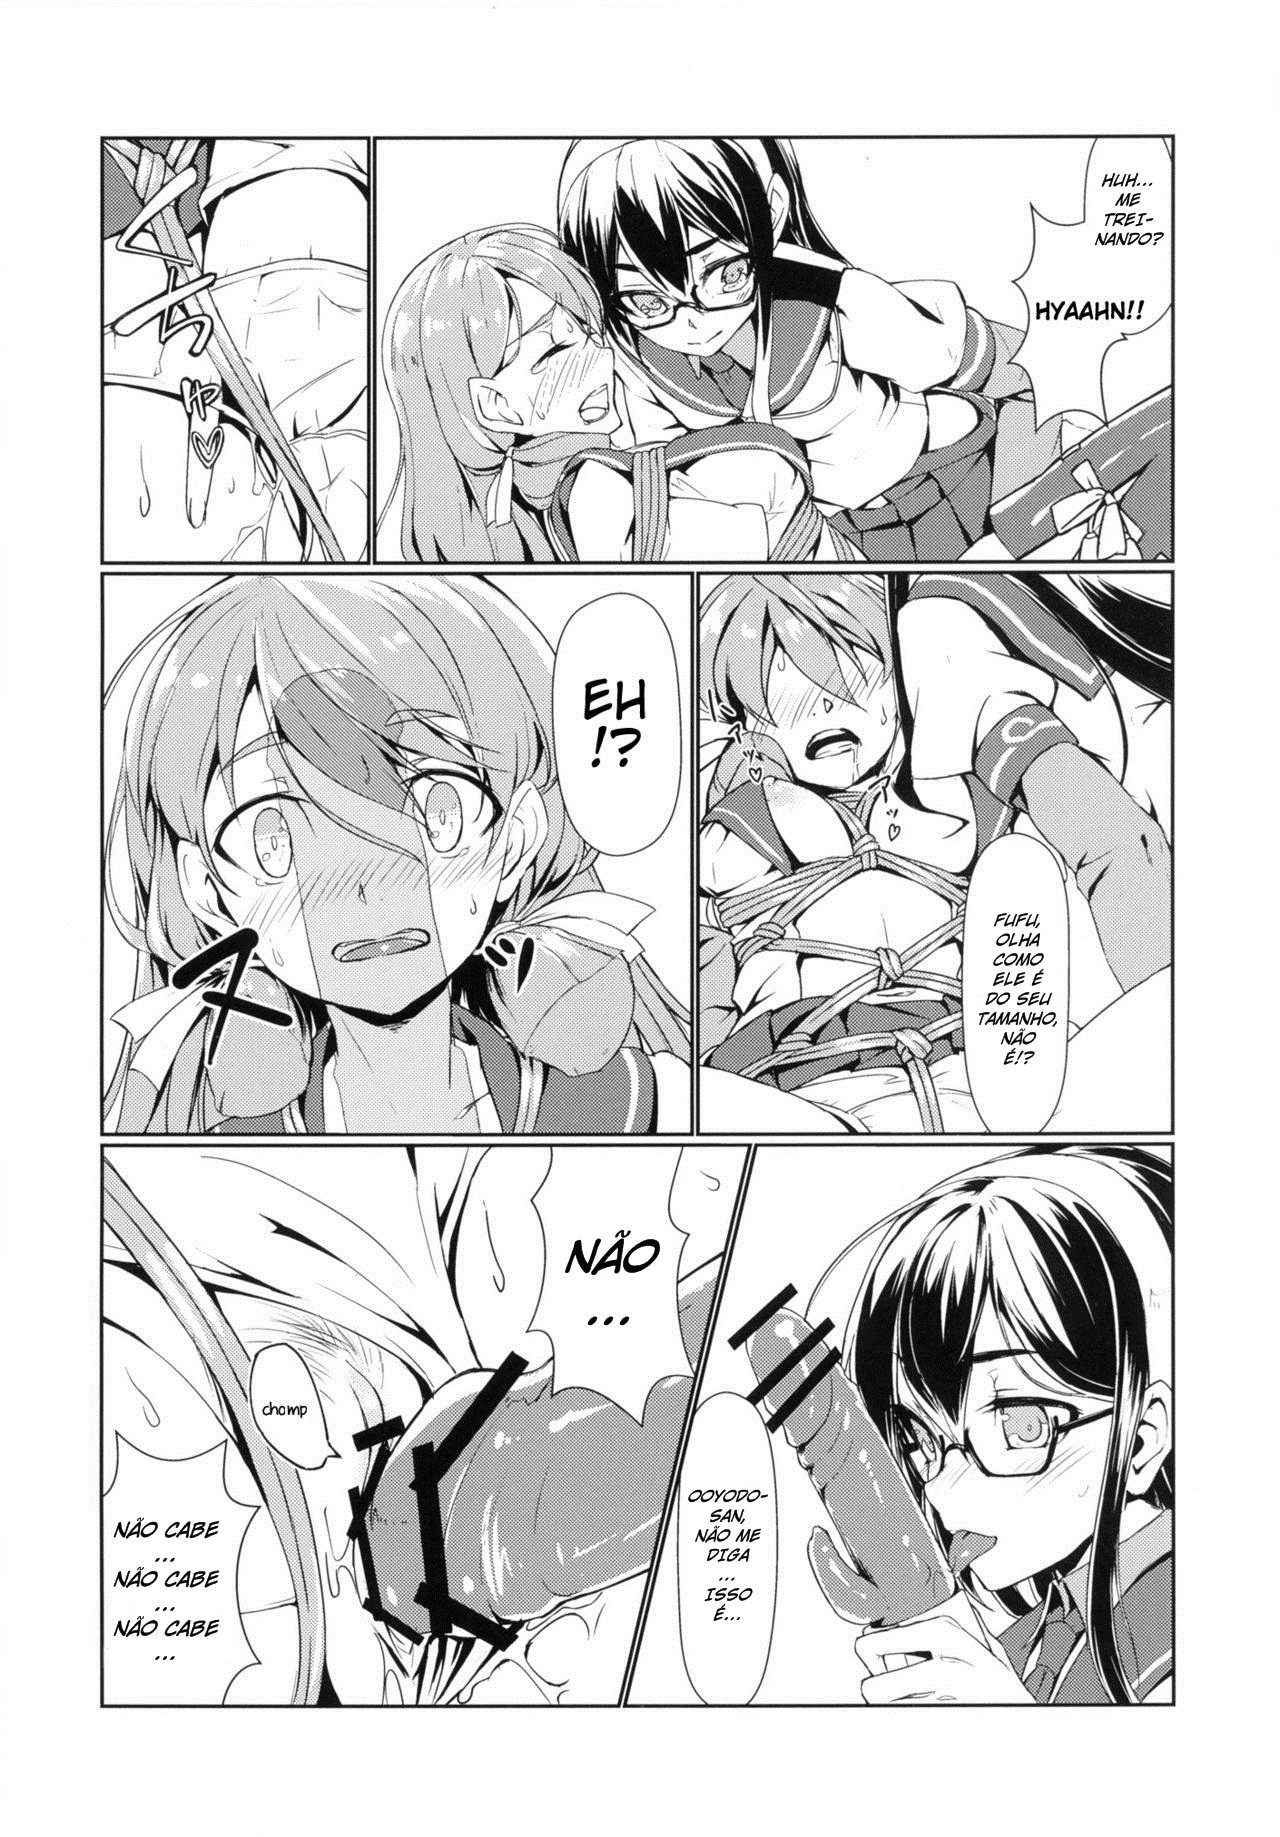 [face to face (ryoattoryo)] Ooyodo to Daily Ninmu Akashi Choukyou Hen | Daily Mission with Ooyodo: Training Akashi (Kantai Collection -KanColle-) [Portuguese-BR] [Hentai Season] [Digital] [face to face (りょう＠涼)] 大淀とデイリー任務 明石調教編 (艦隊これくしょん -艦これ-) [ポルトガル翻訳] [DL版]